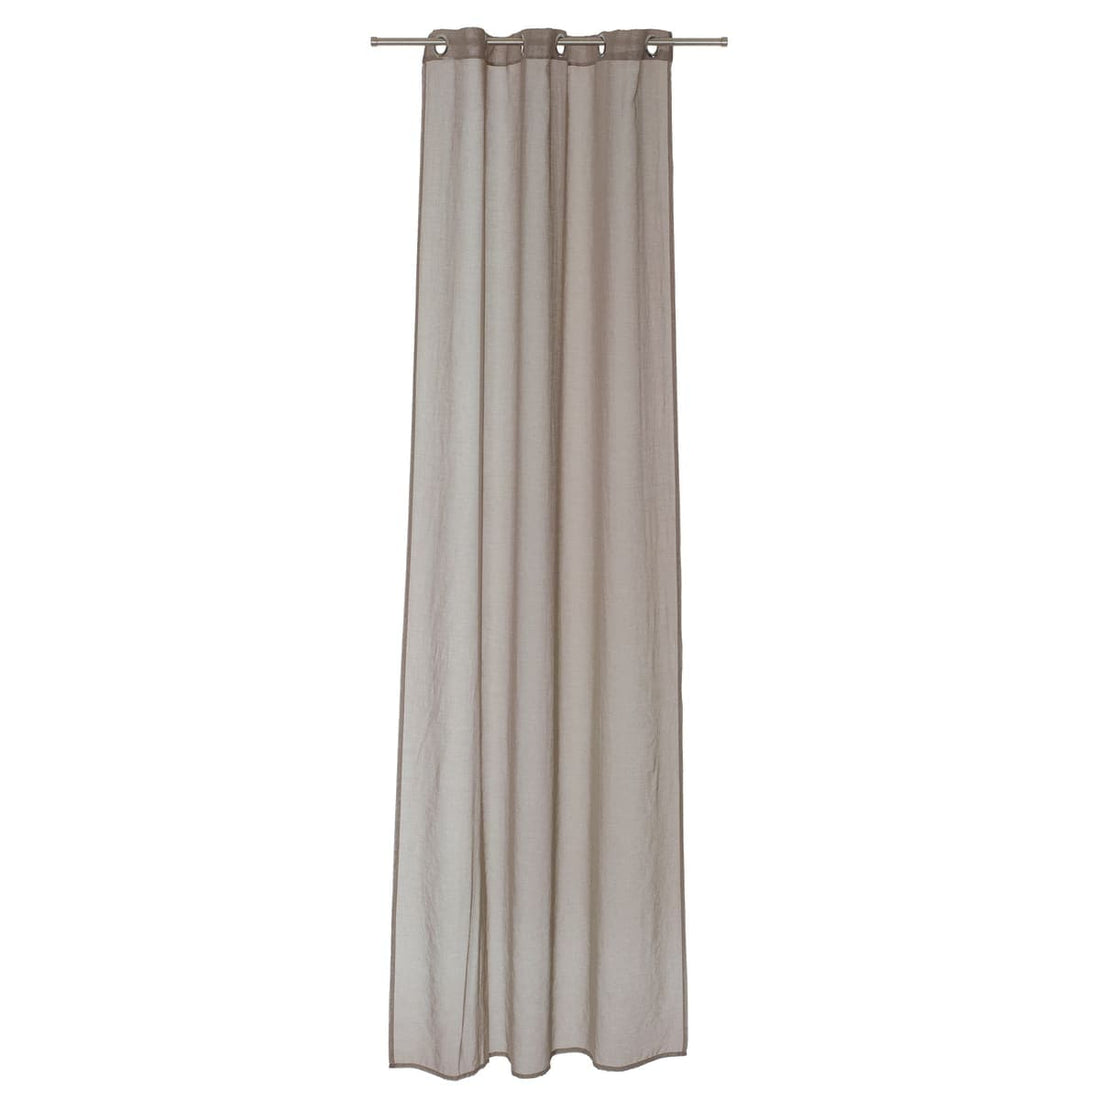 SHALI DOVE GREY FILTER CURTAIN 140X280 CM WITH EYELETS - best price from Maltashopper.com BR480007453